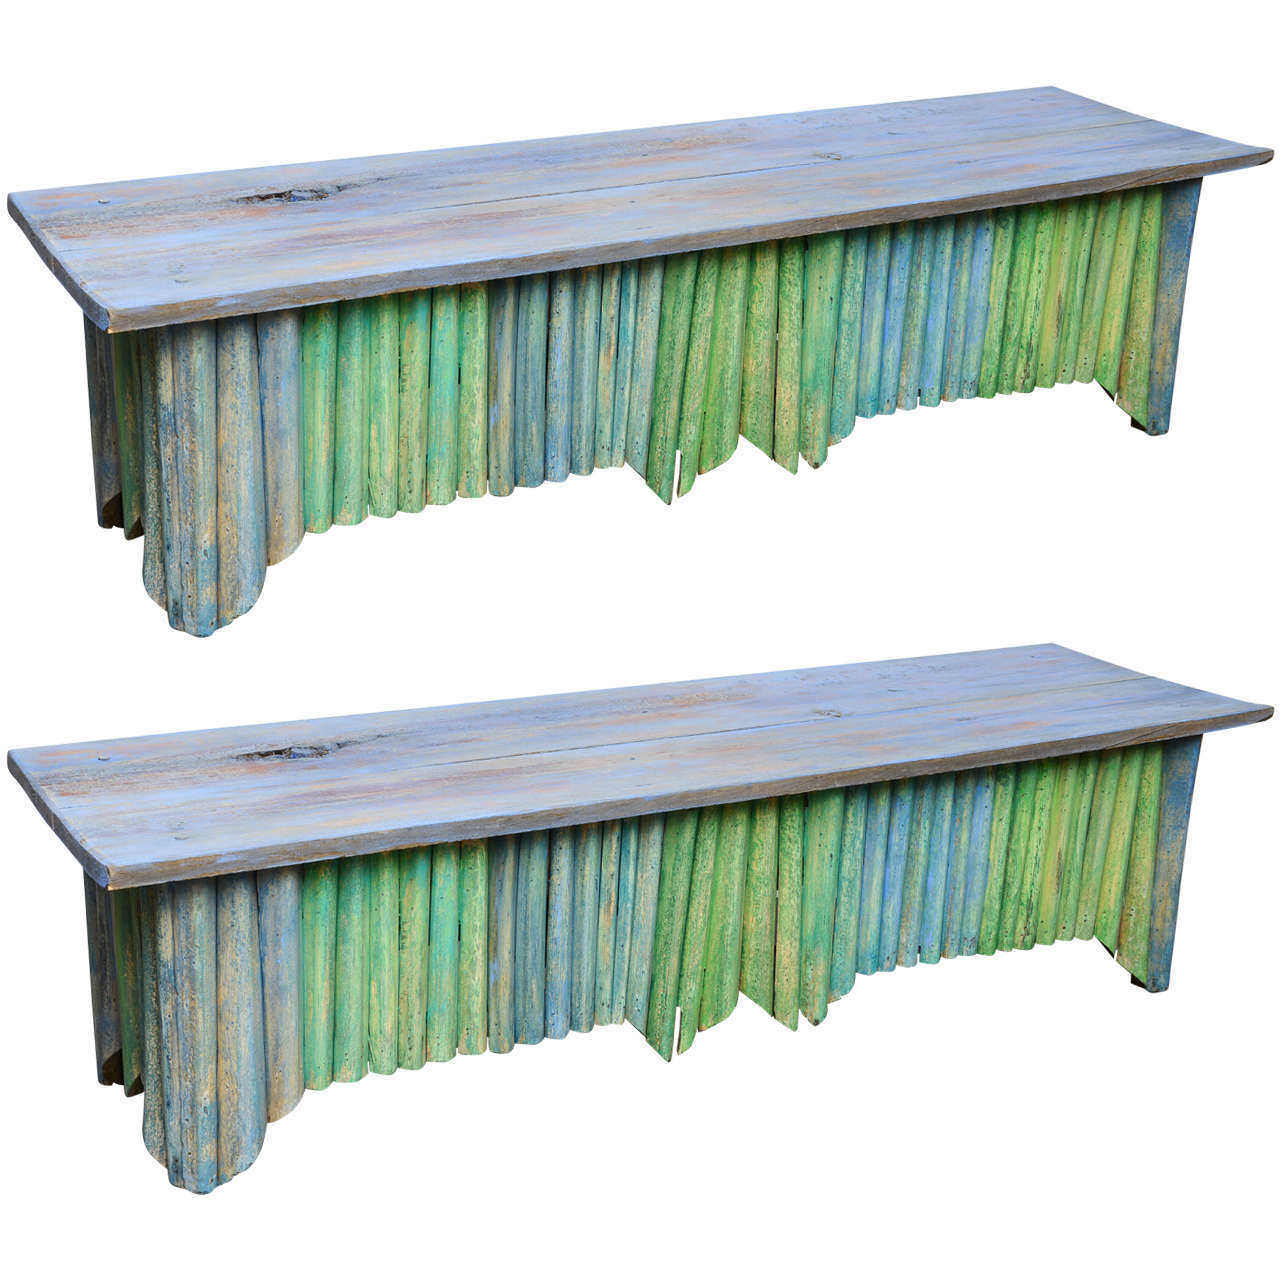 Pair of Painted Palm Frond Benches